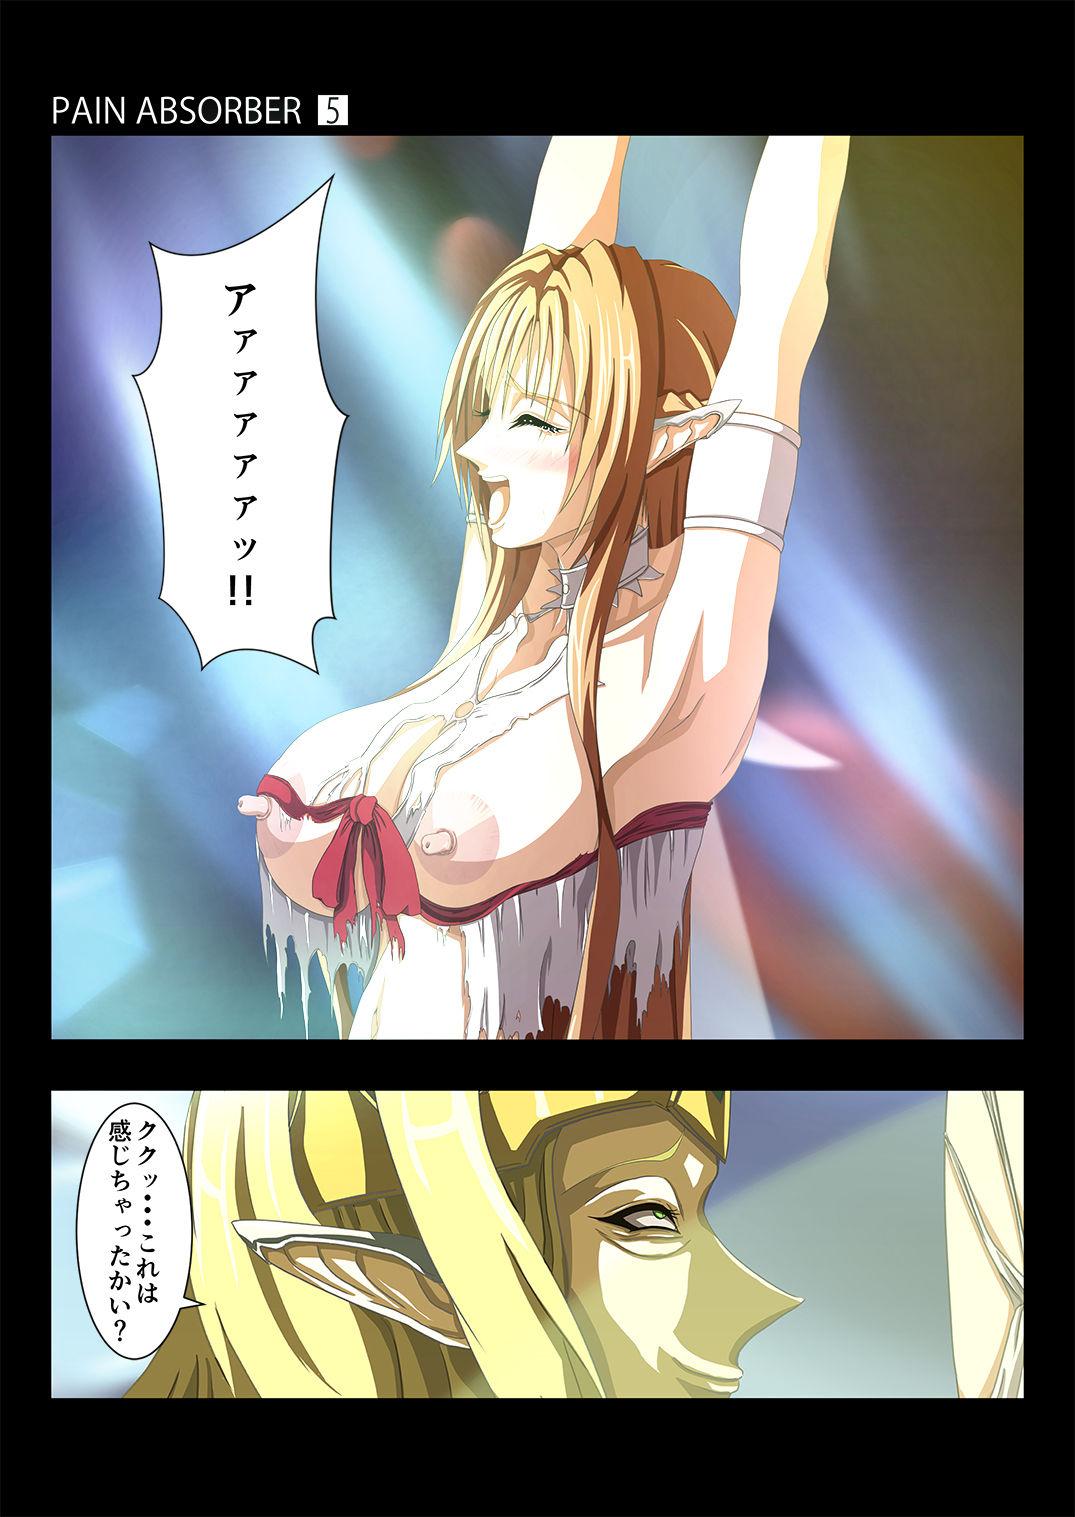 English PAIN ABSORBER 5 - Sword art online Gay Bareback - Page 6